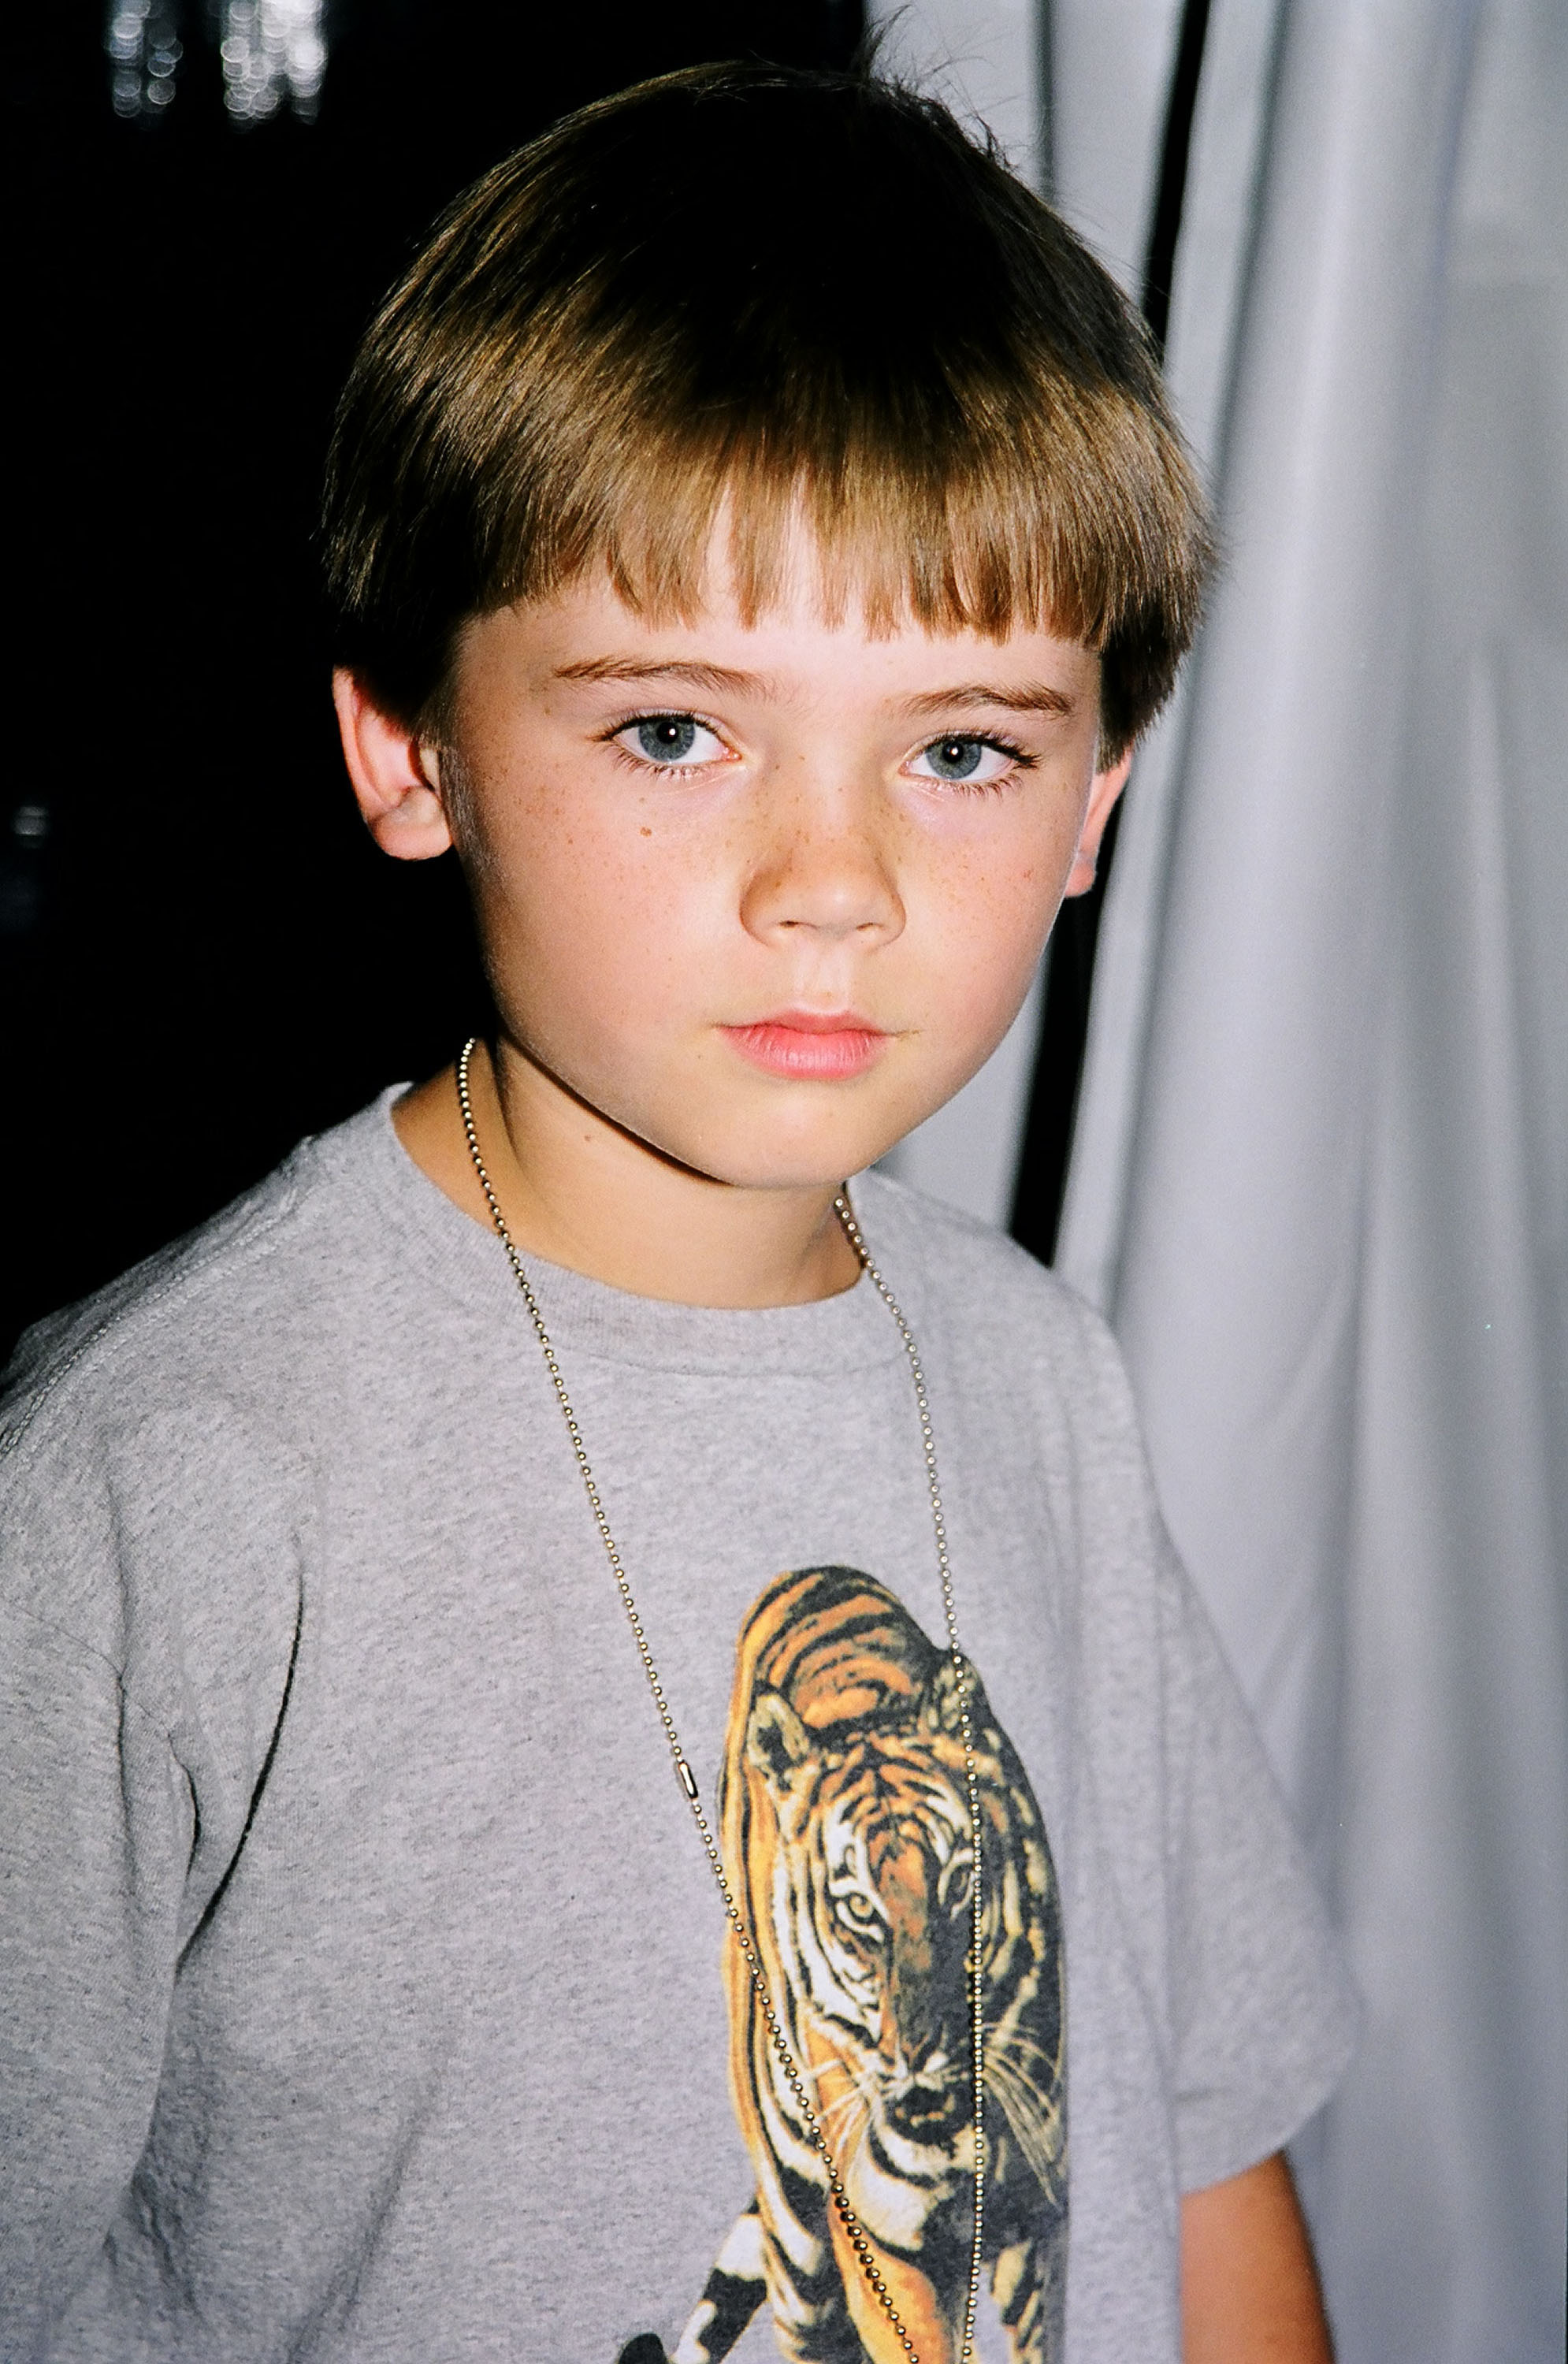 Jake Lloyd during Nickelodeon's 1998 "Big Help" in Los Angeles, California, United States. | Source: Getty Images